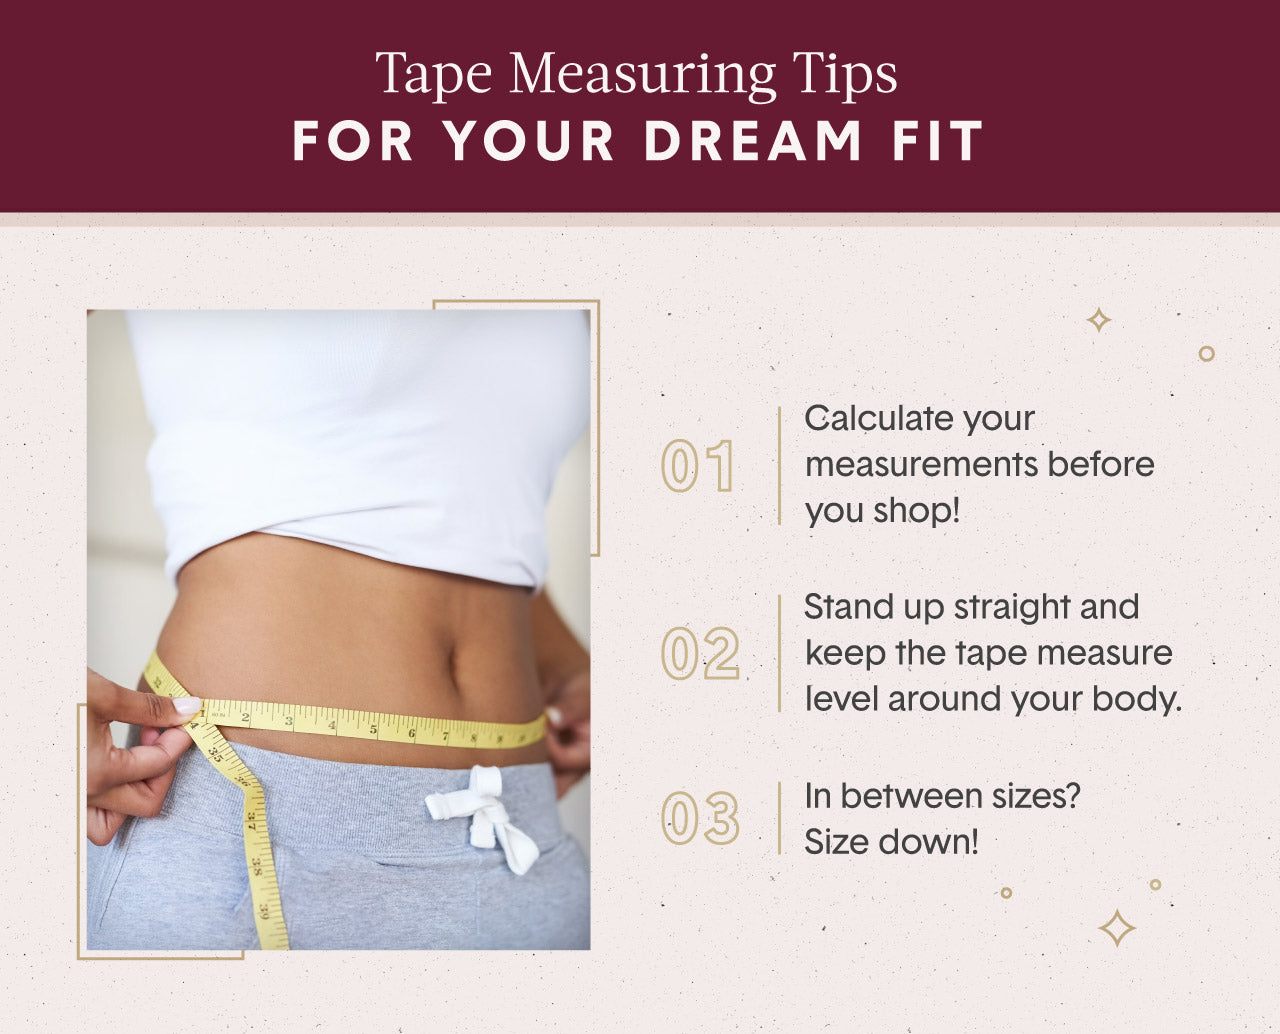 Panties Fitting Guide - How to Measure Your Waist